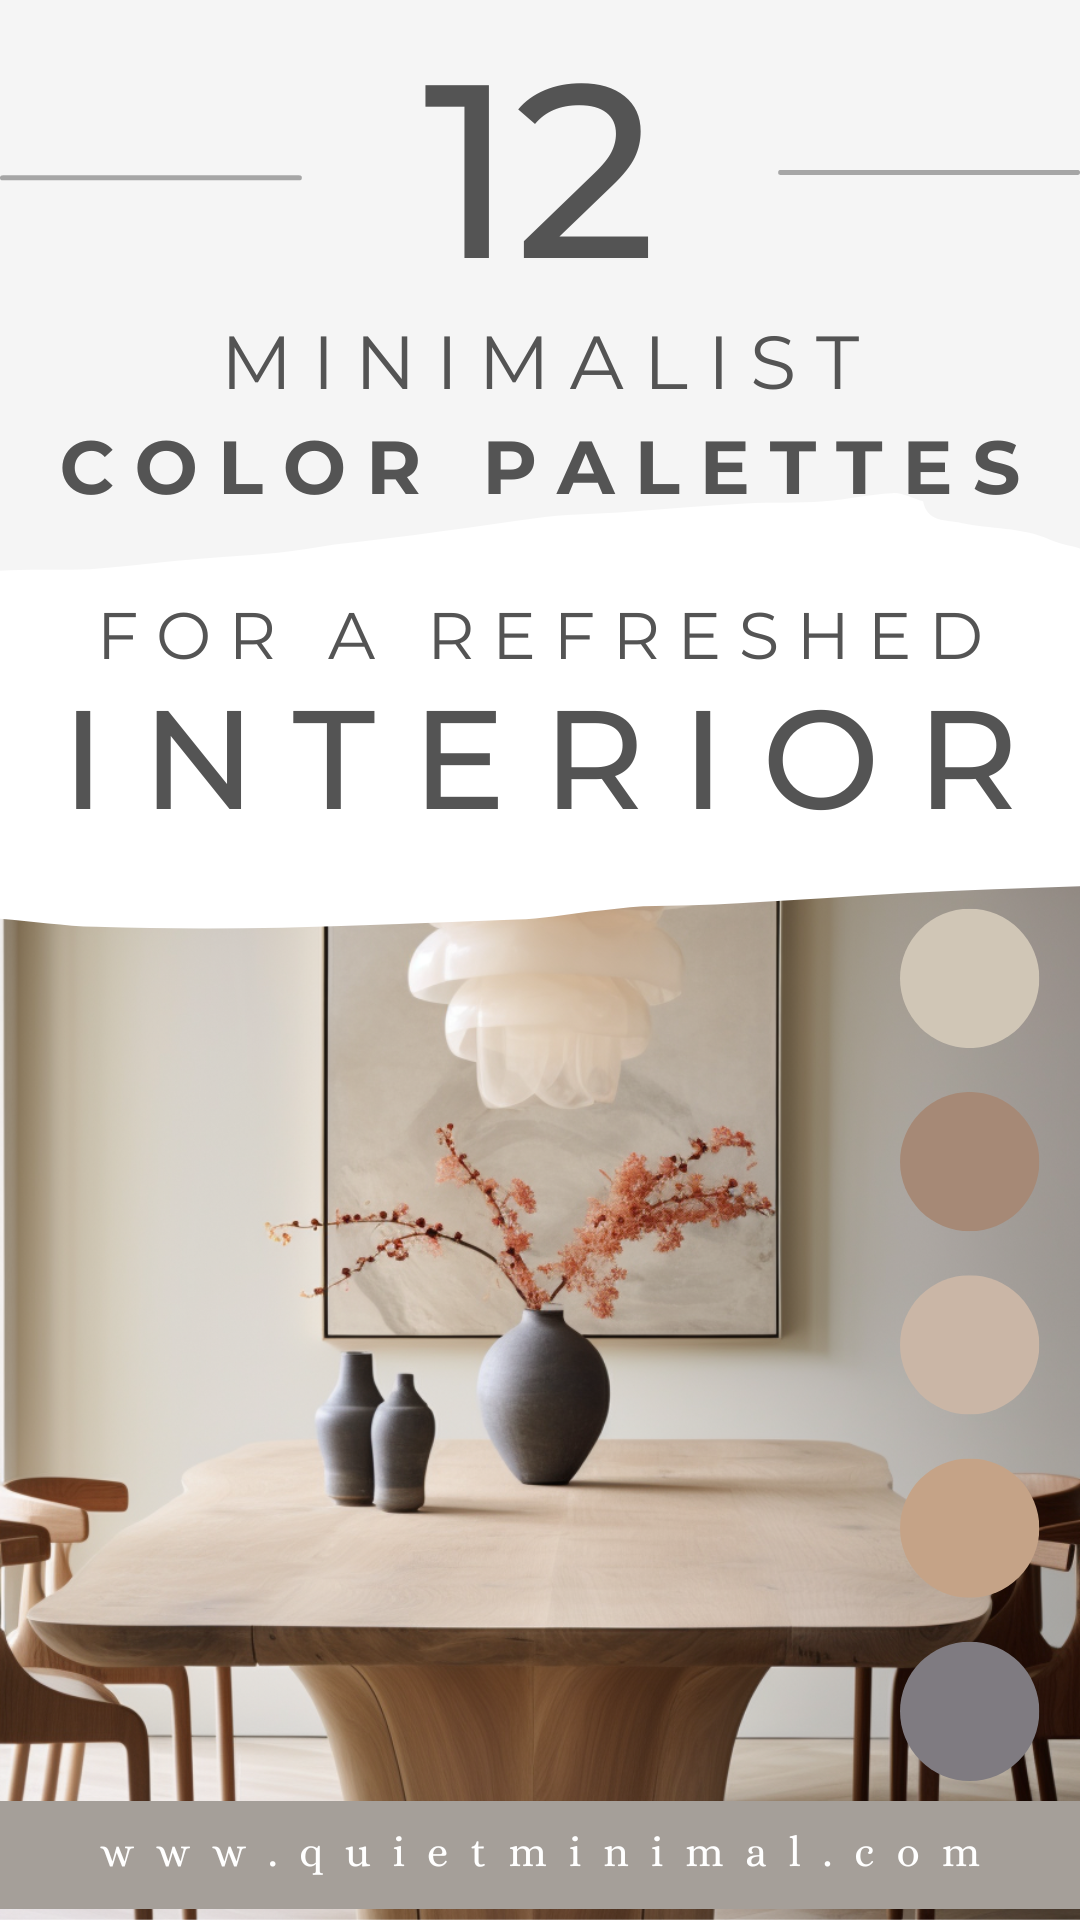 12 minimalist color palettes for a refreshed interior.